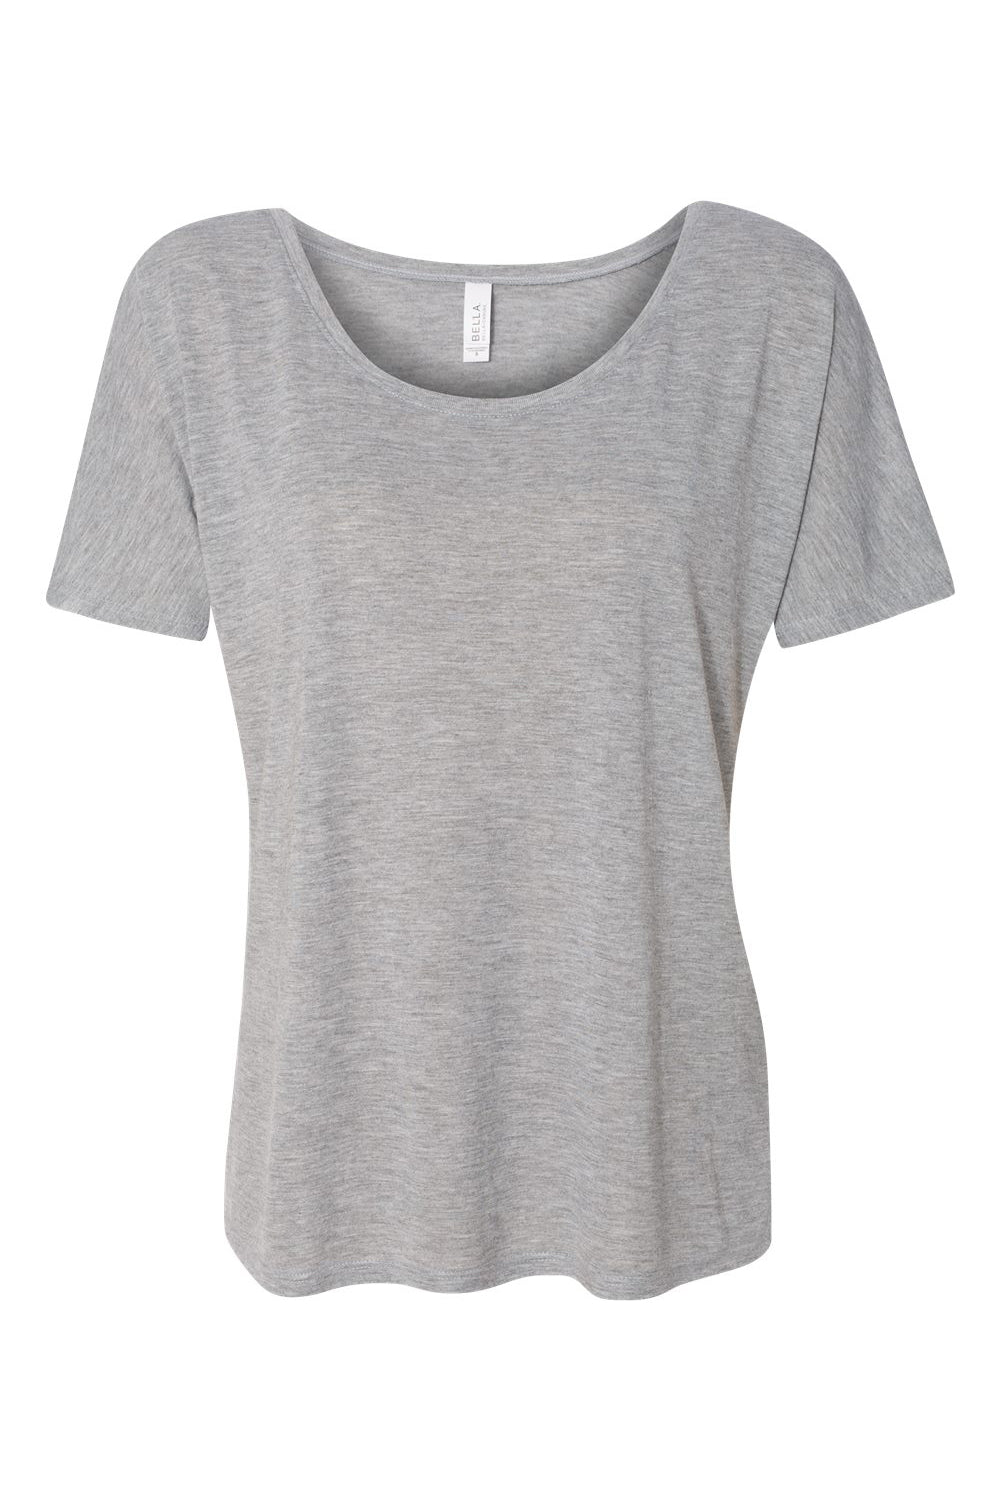 Bella + Canvas BC8816/8816 Womens Slouchy Short Sleeve Wide Neck T-Shirt Heather Grey Flat Front